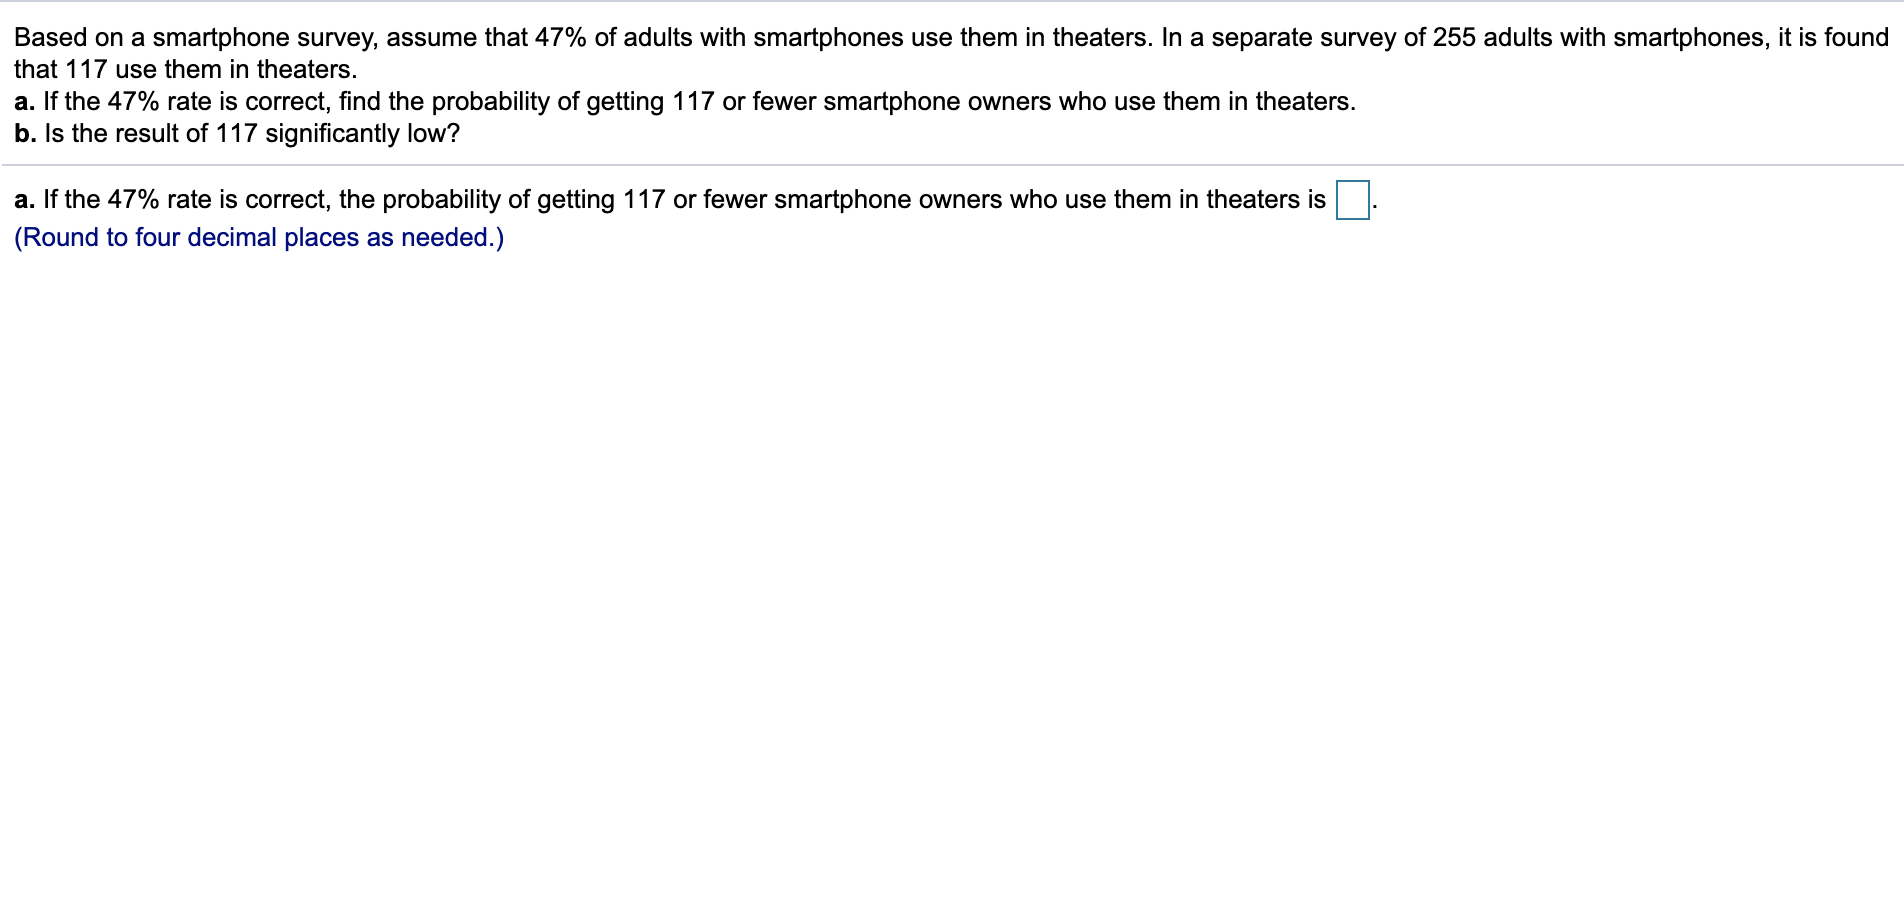 Based on a smartphone survey, assume that 47% of adults with smartphones use them in theaters. In a separate survey of 255 adults with smartphones, it is found
that 117 use them in theaters.
a. If the 47% rate is correct, find the probability of getting 117 or fewer smartphone owners who use them in theaters.
b. Is the result of 117 significantly low?
a. If the 47% rate is correct, the probability of getting 117 or fewer smartphone owners who use them in theaters is
(Round to four decimal places as needed.)
